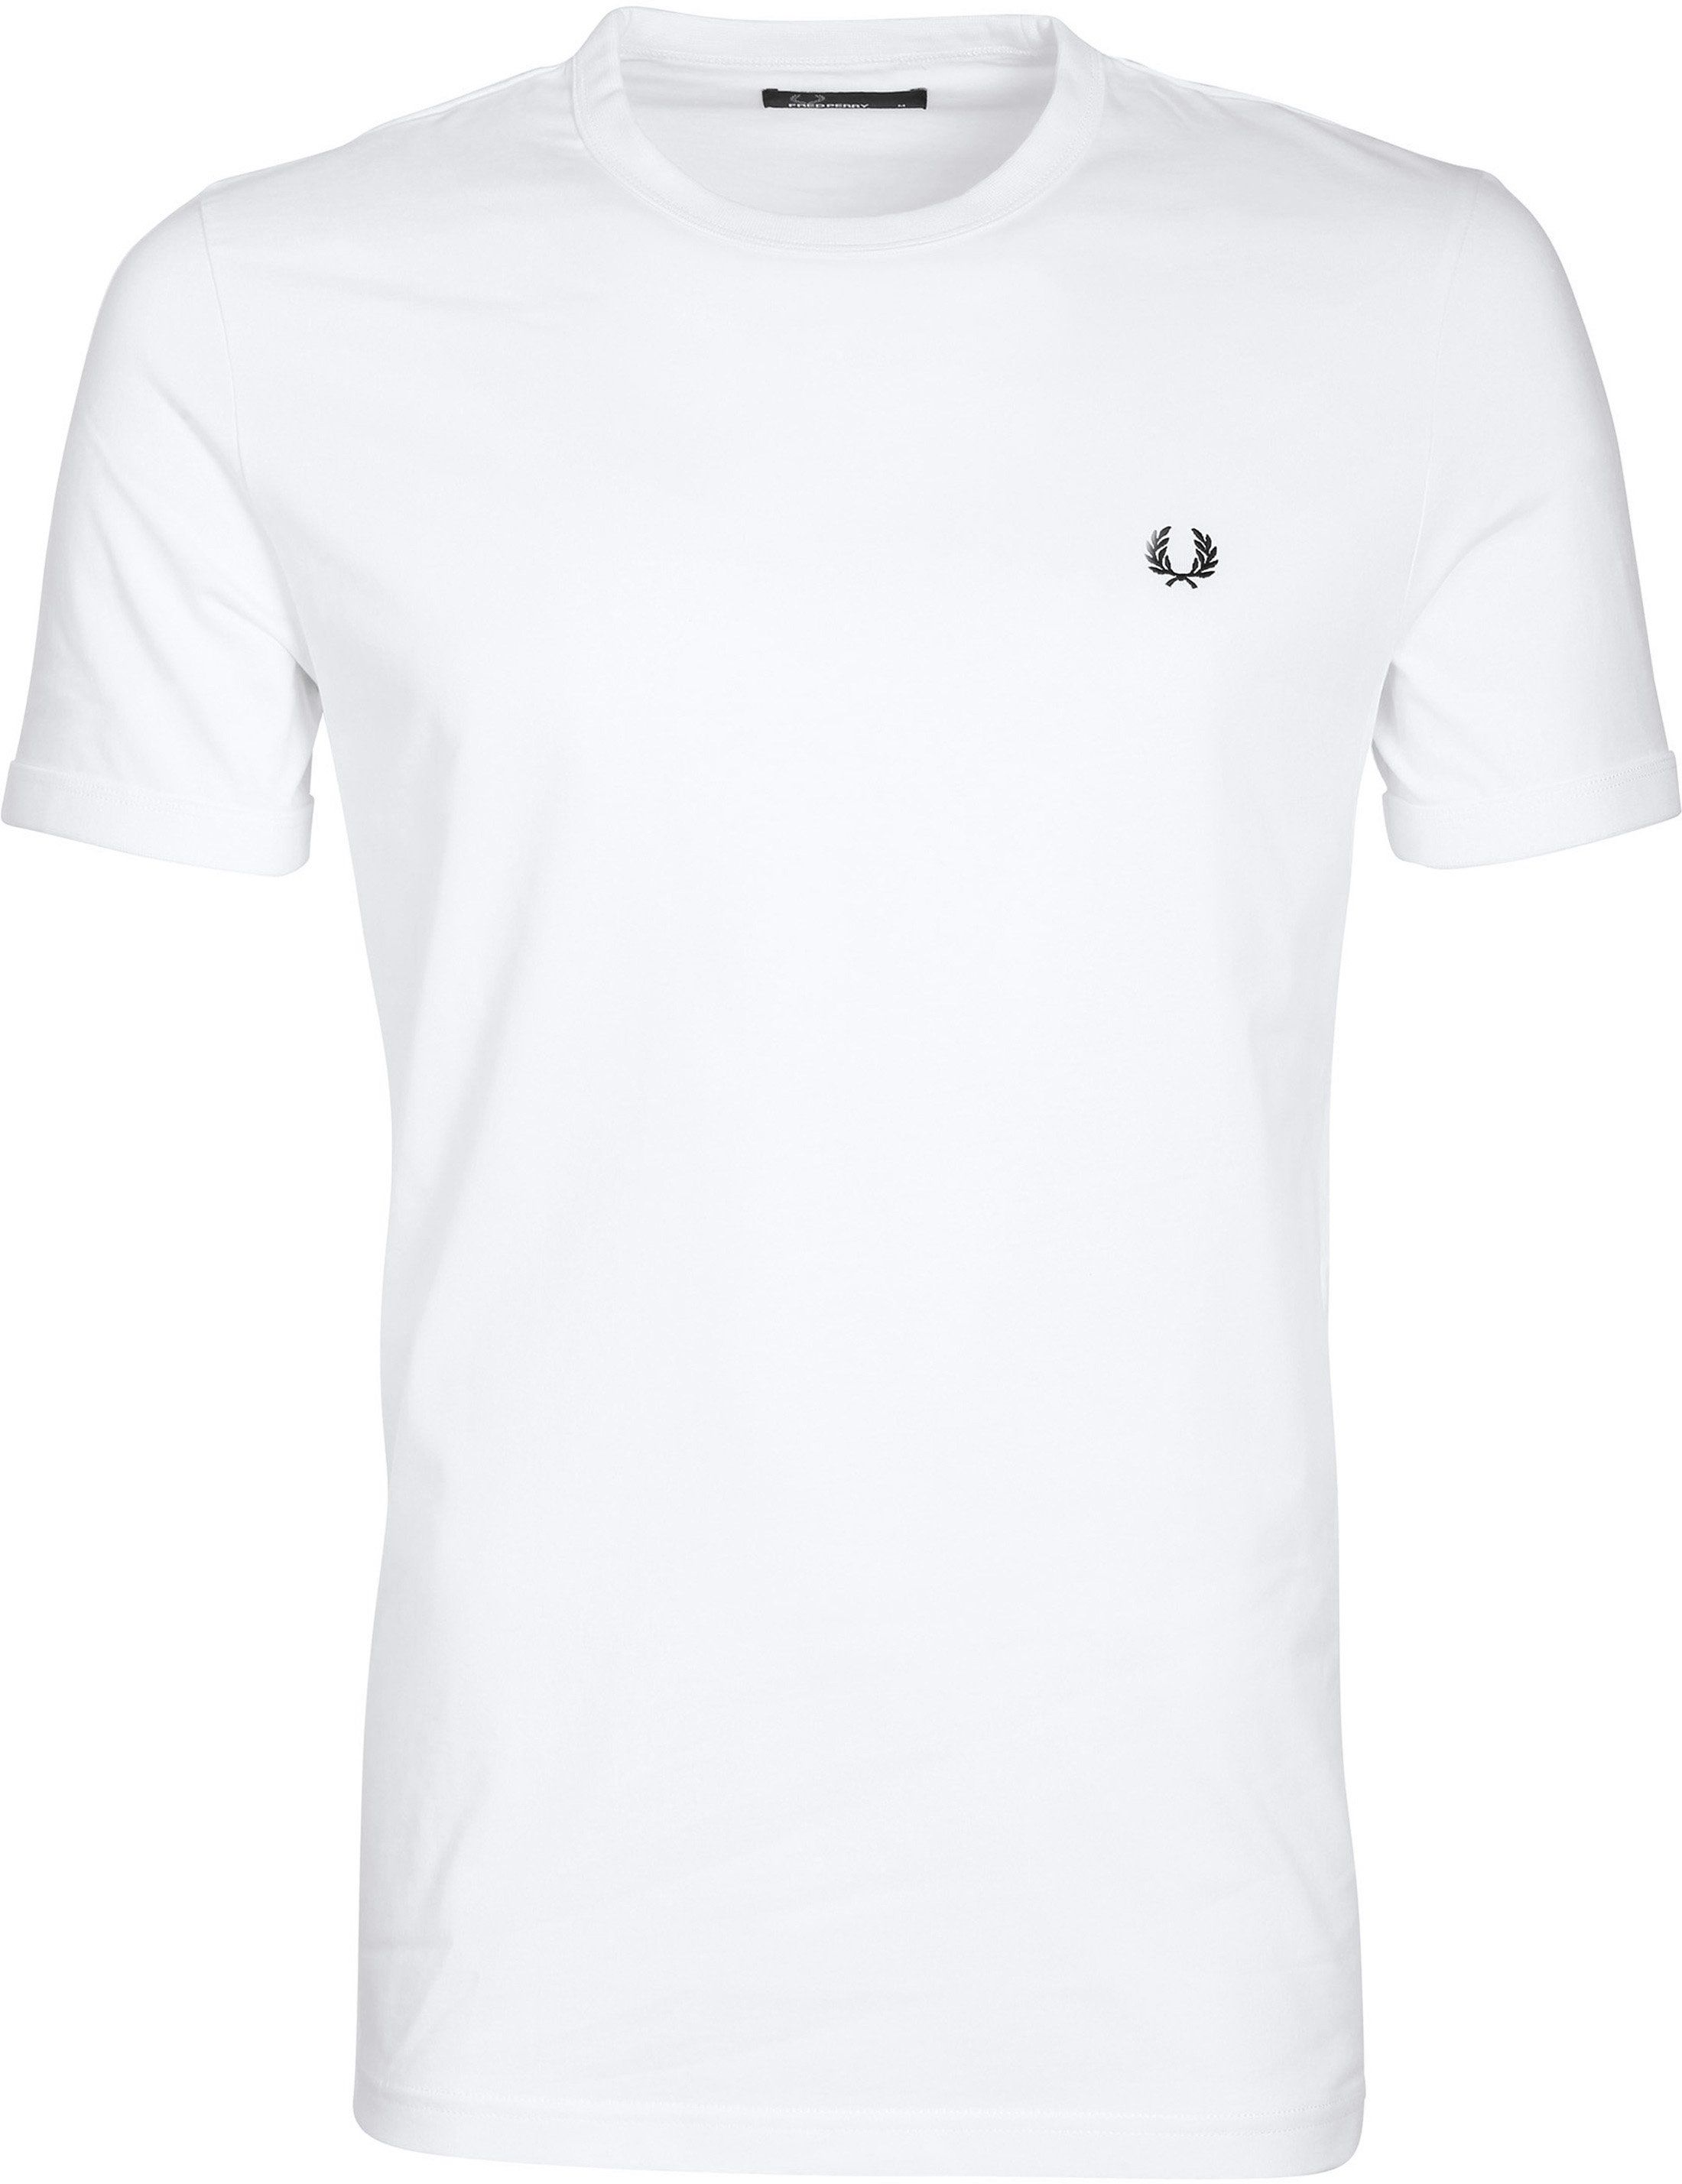 Fred Perry Ringer Shirt White size L